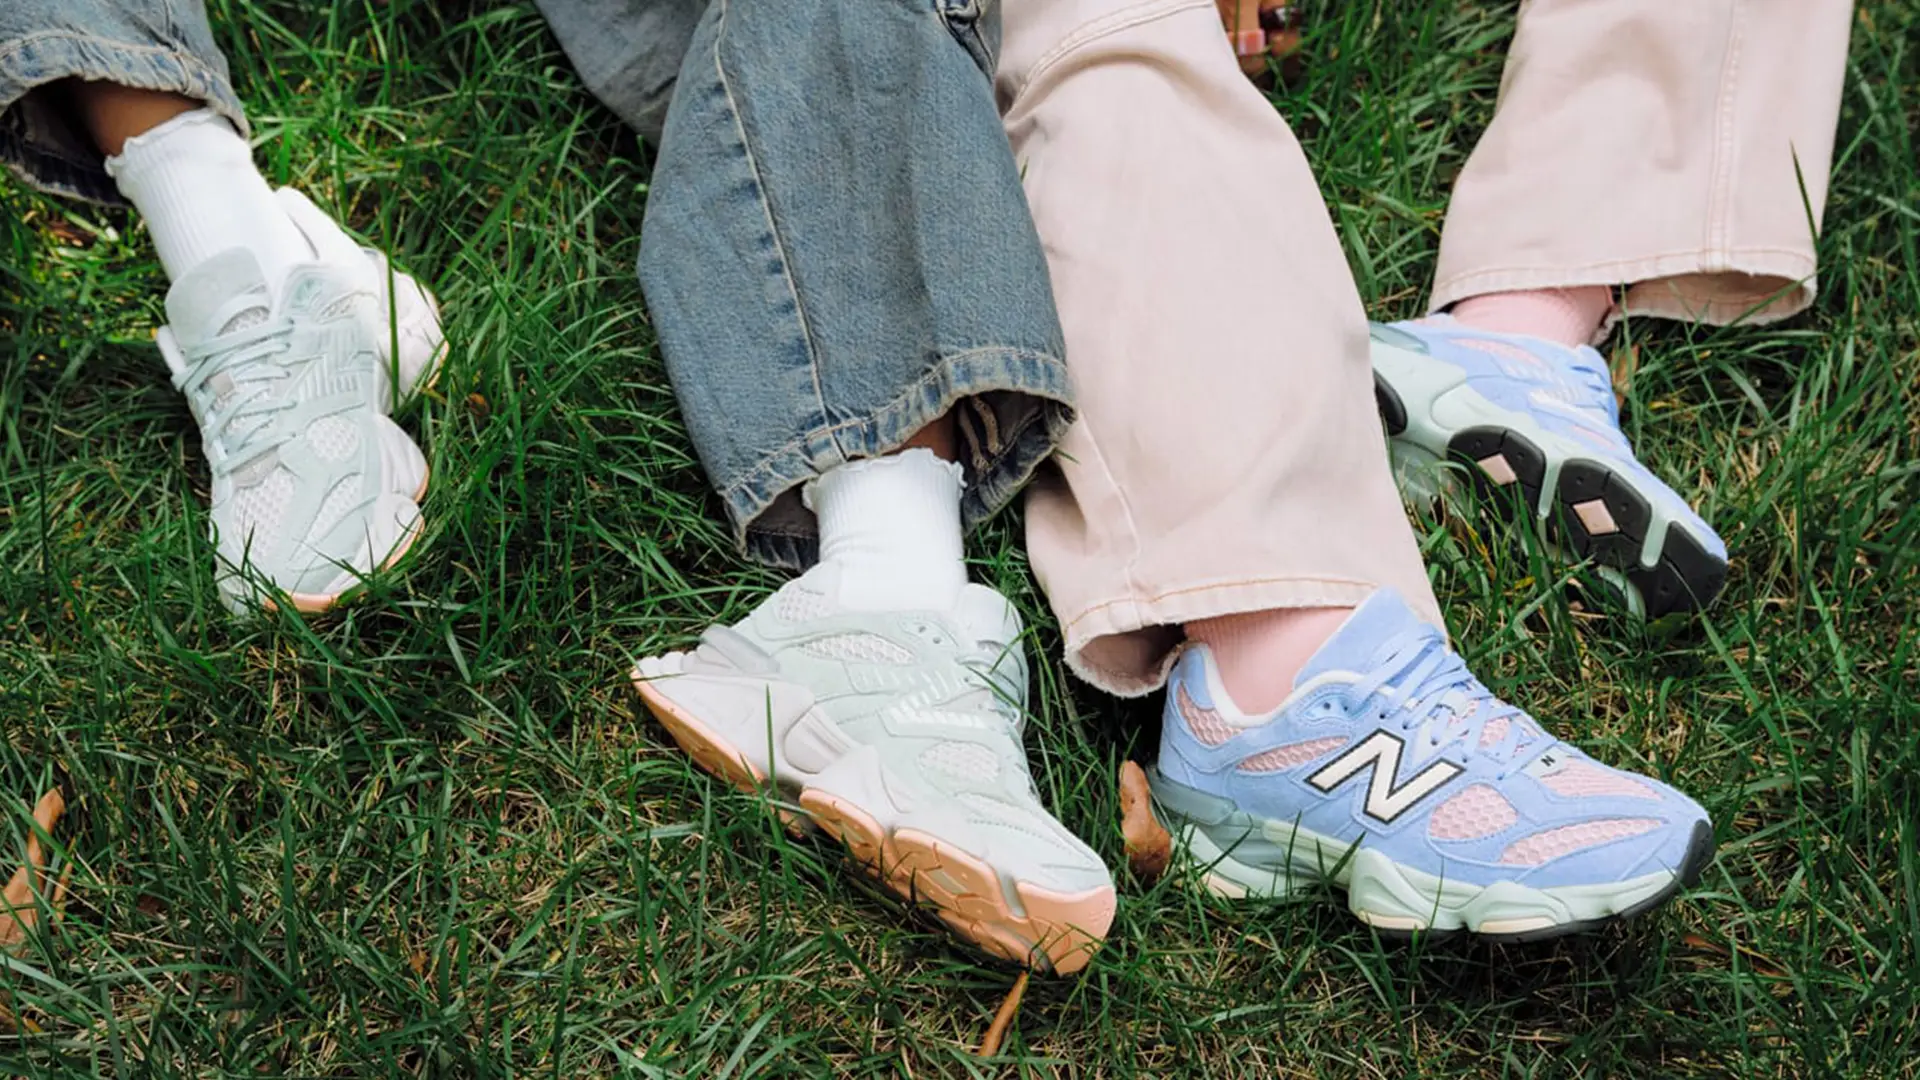 New Balance range Balance 9060 "Missing Pieces" Pack Is Officially Revealed